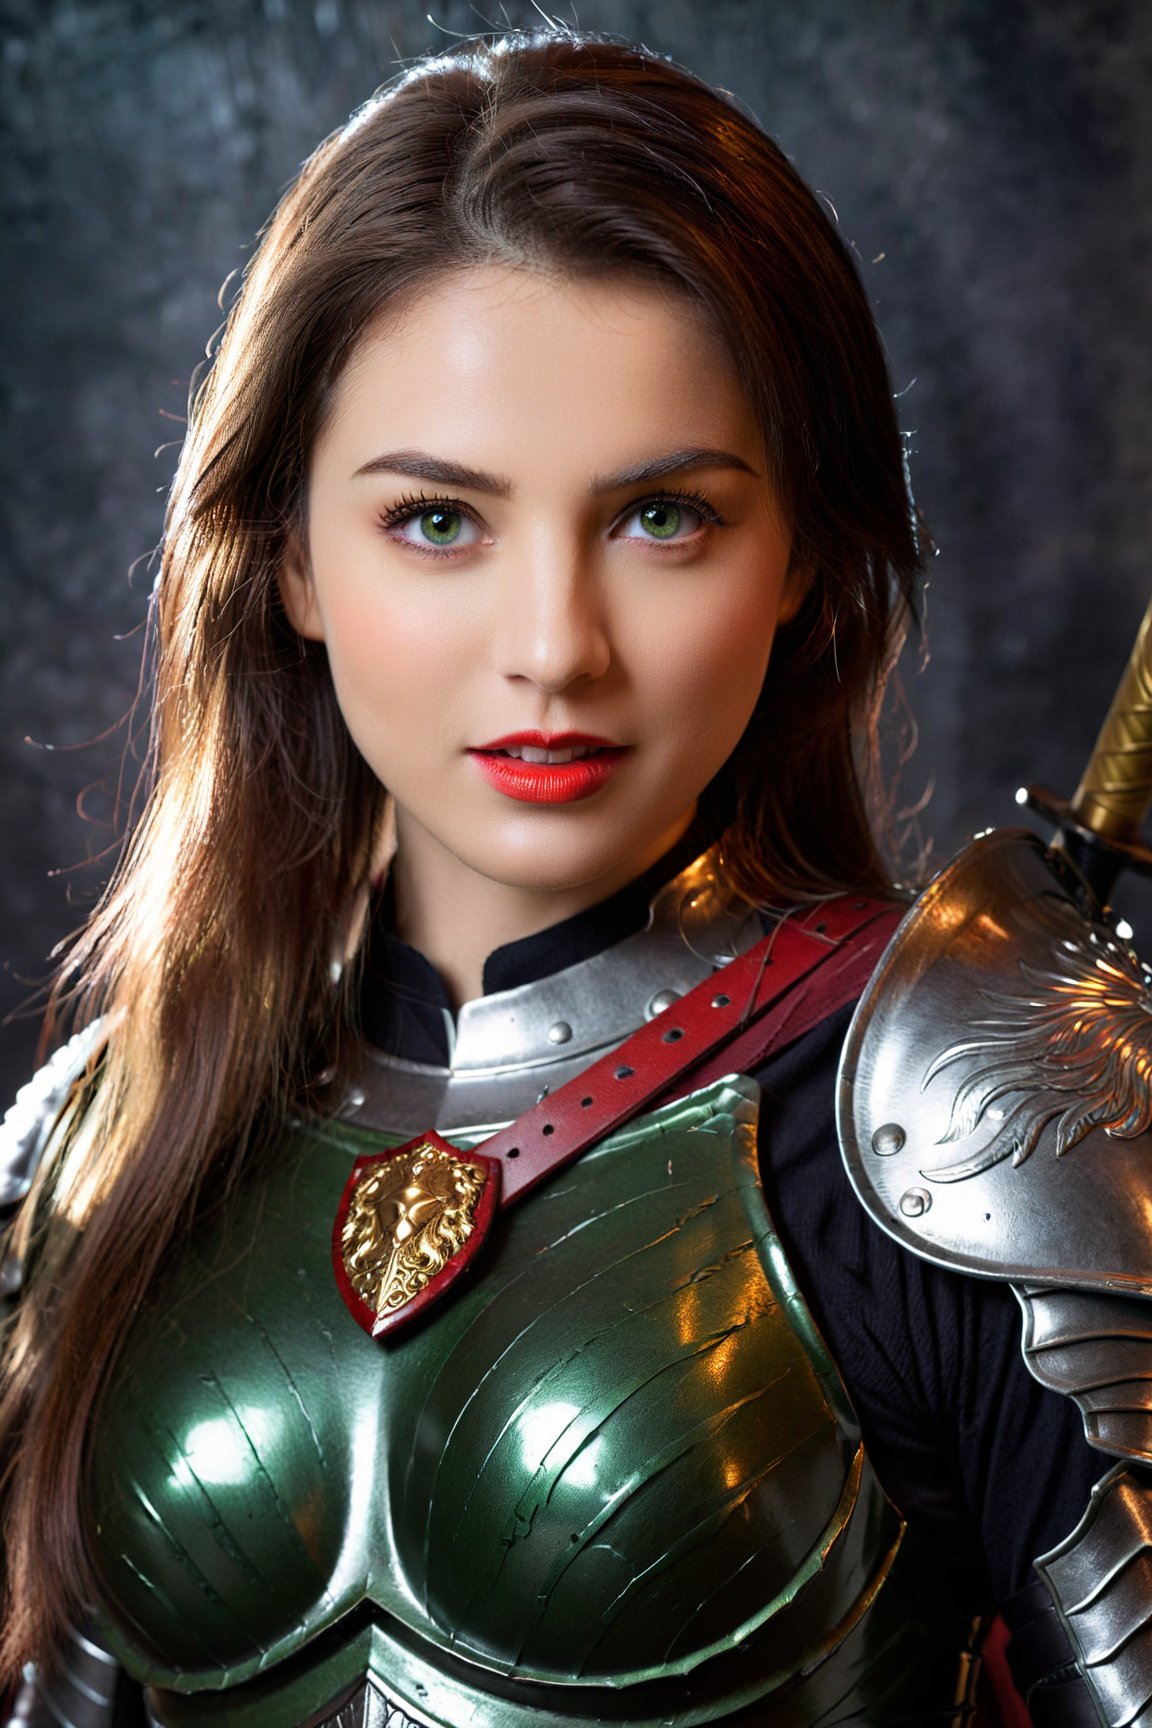 (best quality, ultra-detailed, realistic:1.37), vivid colors, studio lighting, beautiful detailed eyes, beautiful detailed lips, extremely detailed eyes and face, longeyelashes, 1girl, angry smile, green eyes, armor body shut, warrior woman, confident pose, strong and fierce, shining armor, graceful movements, dynamic background, night scene, sword in hand, sharp edges, reflection of moonlight, glowing energy, foreboding atmosphere, soft shadows, unyielding determination, roaring flames, battle-ready, brave warrior, greenery, subtle highlights, splashes of red, contrast of colors, dark silhouette, sublime scene, heroine with a purpose, defiance in her gaze, intense emotion, powerful presence, mysterious aura, ornate details, exquisite craftsmanship, unstoppable force.